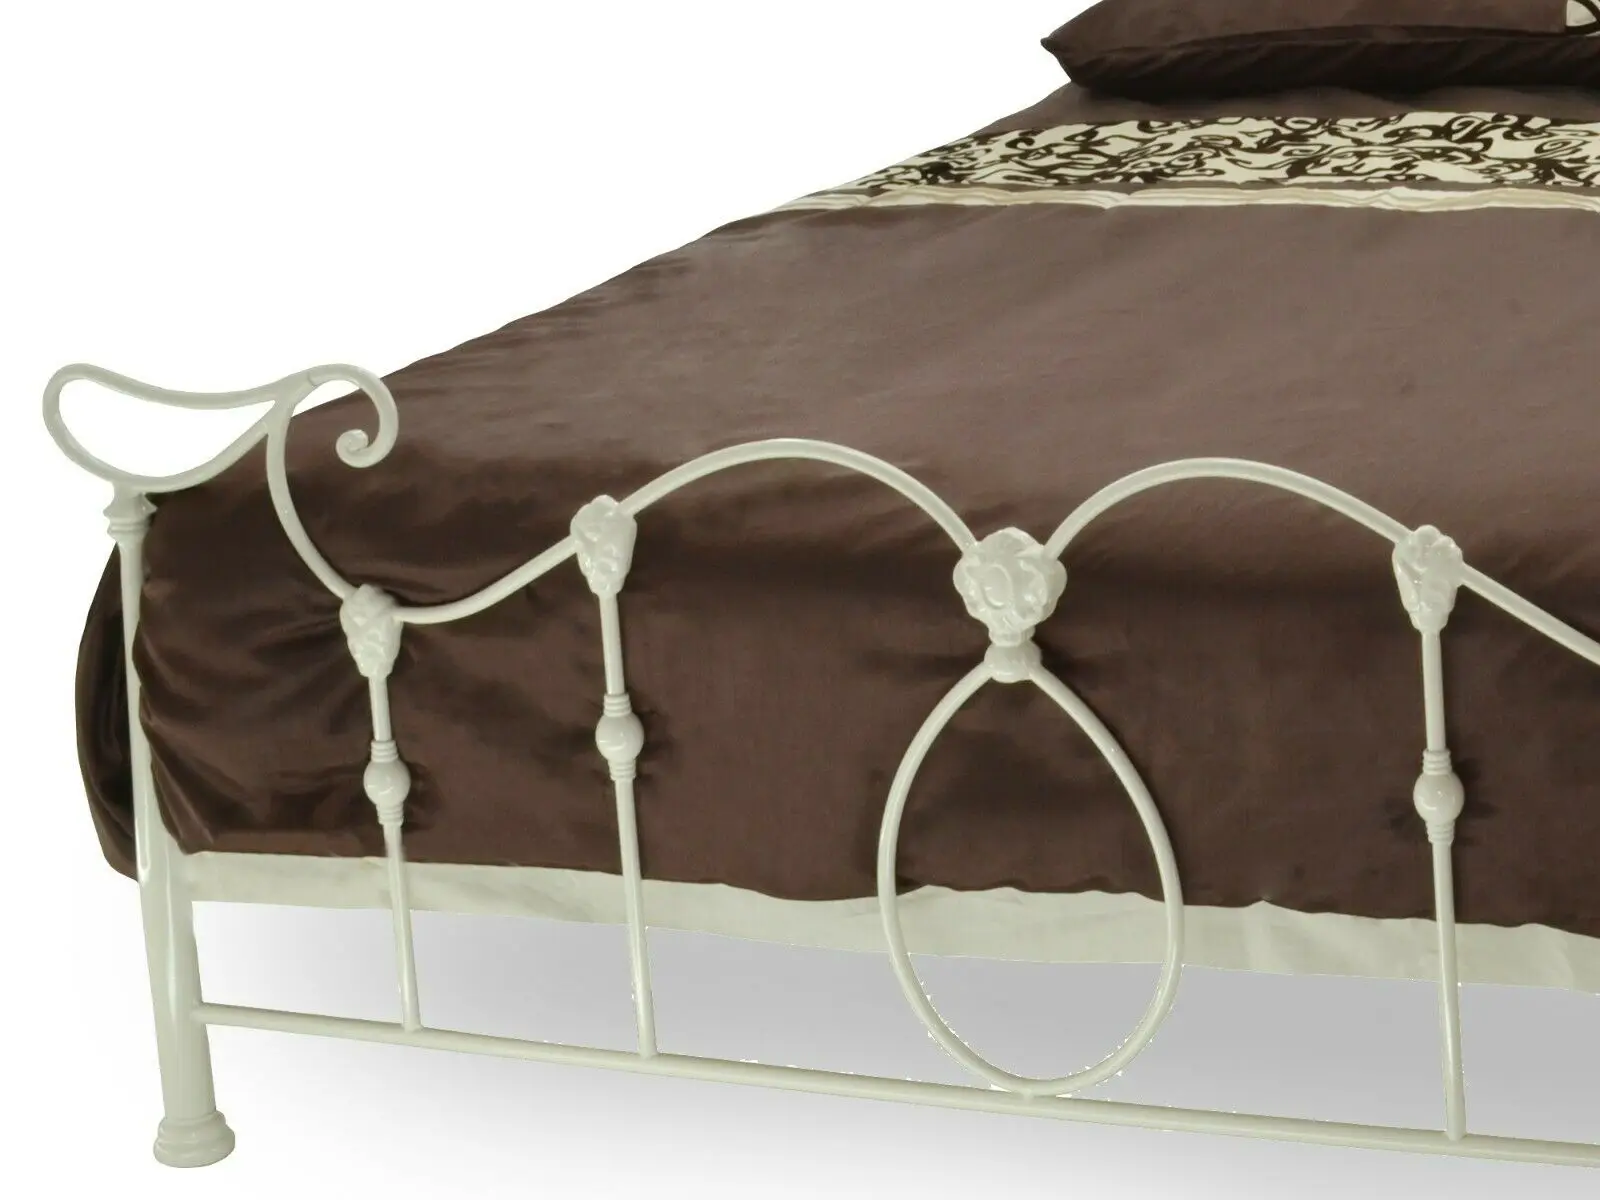 Home Bed Specific Use and Double,4'6 Size bed room furniture